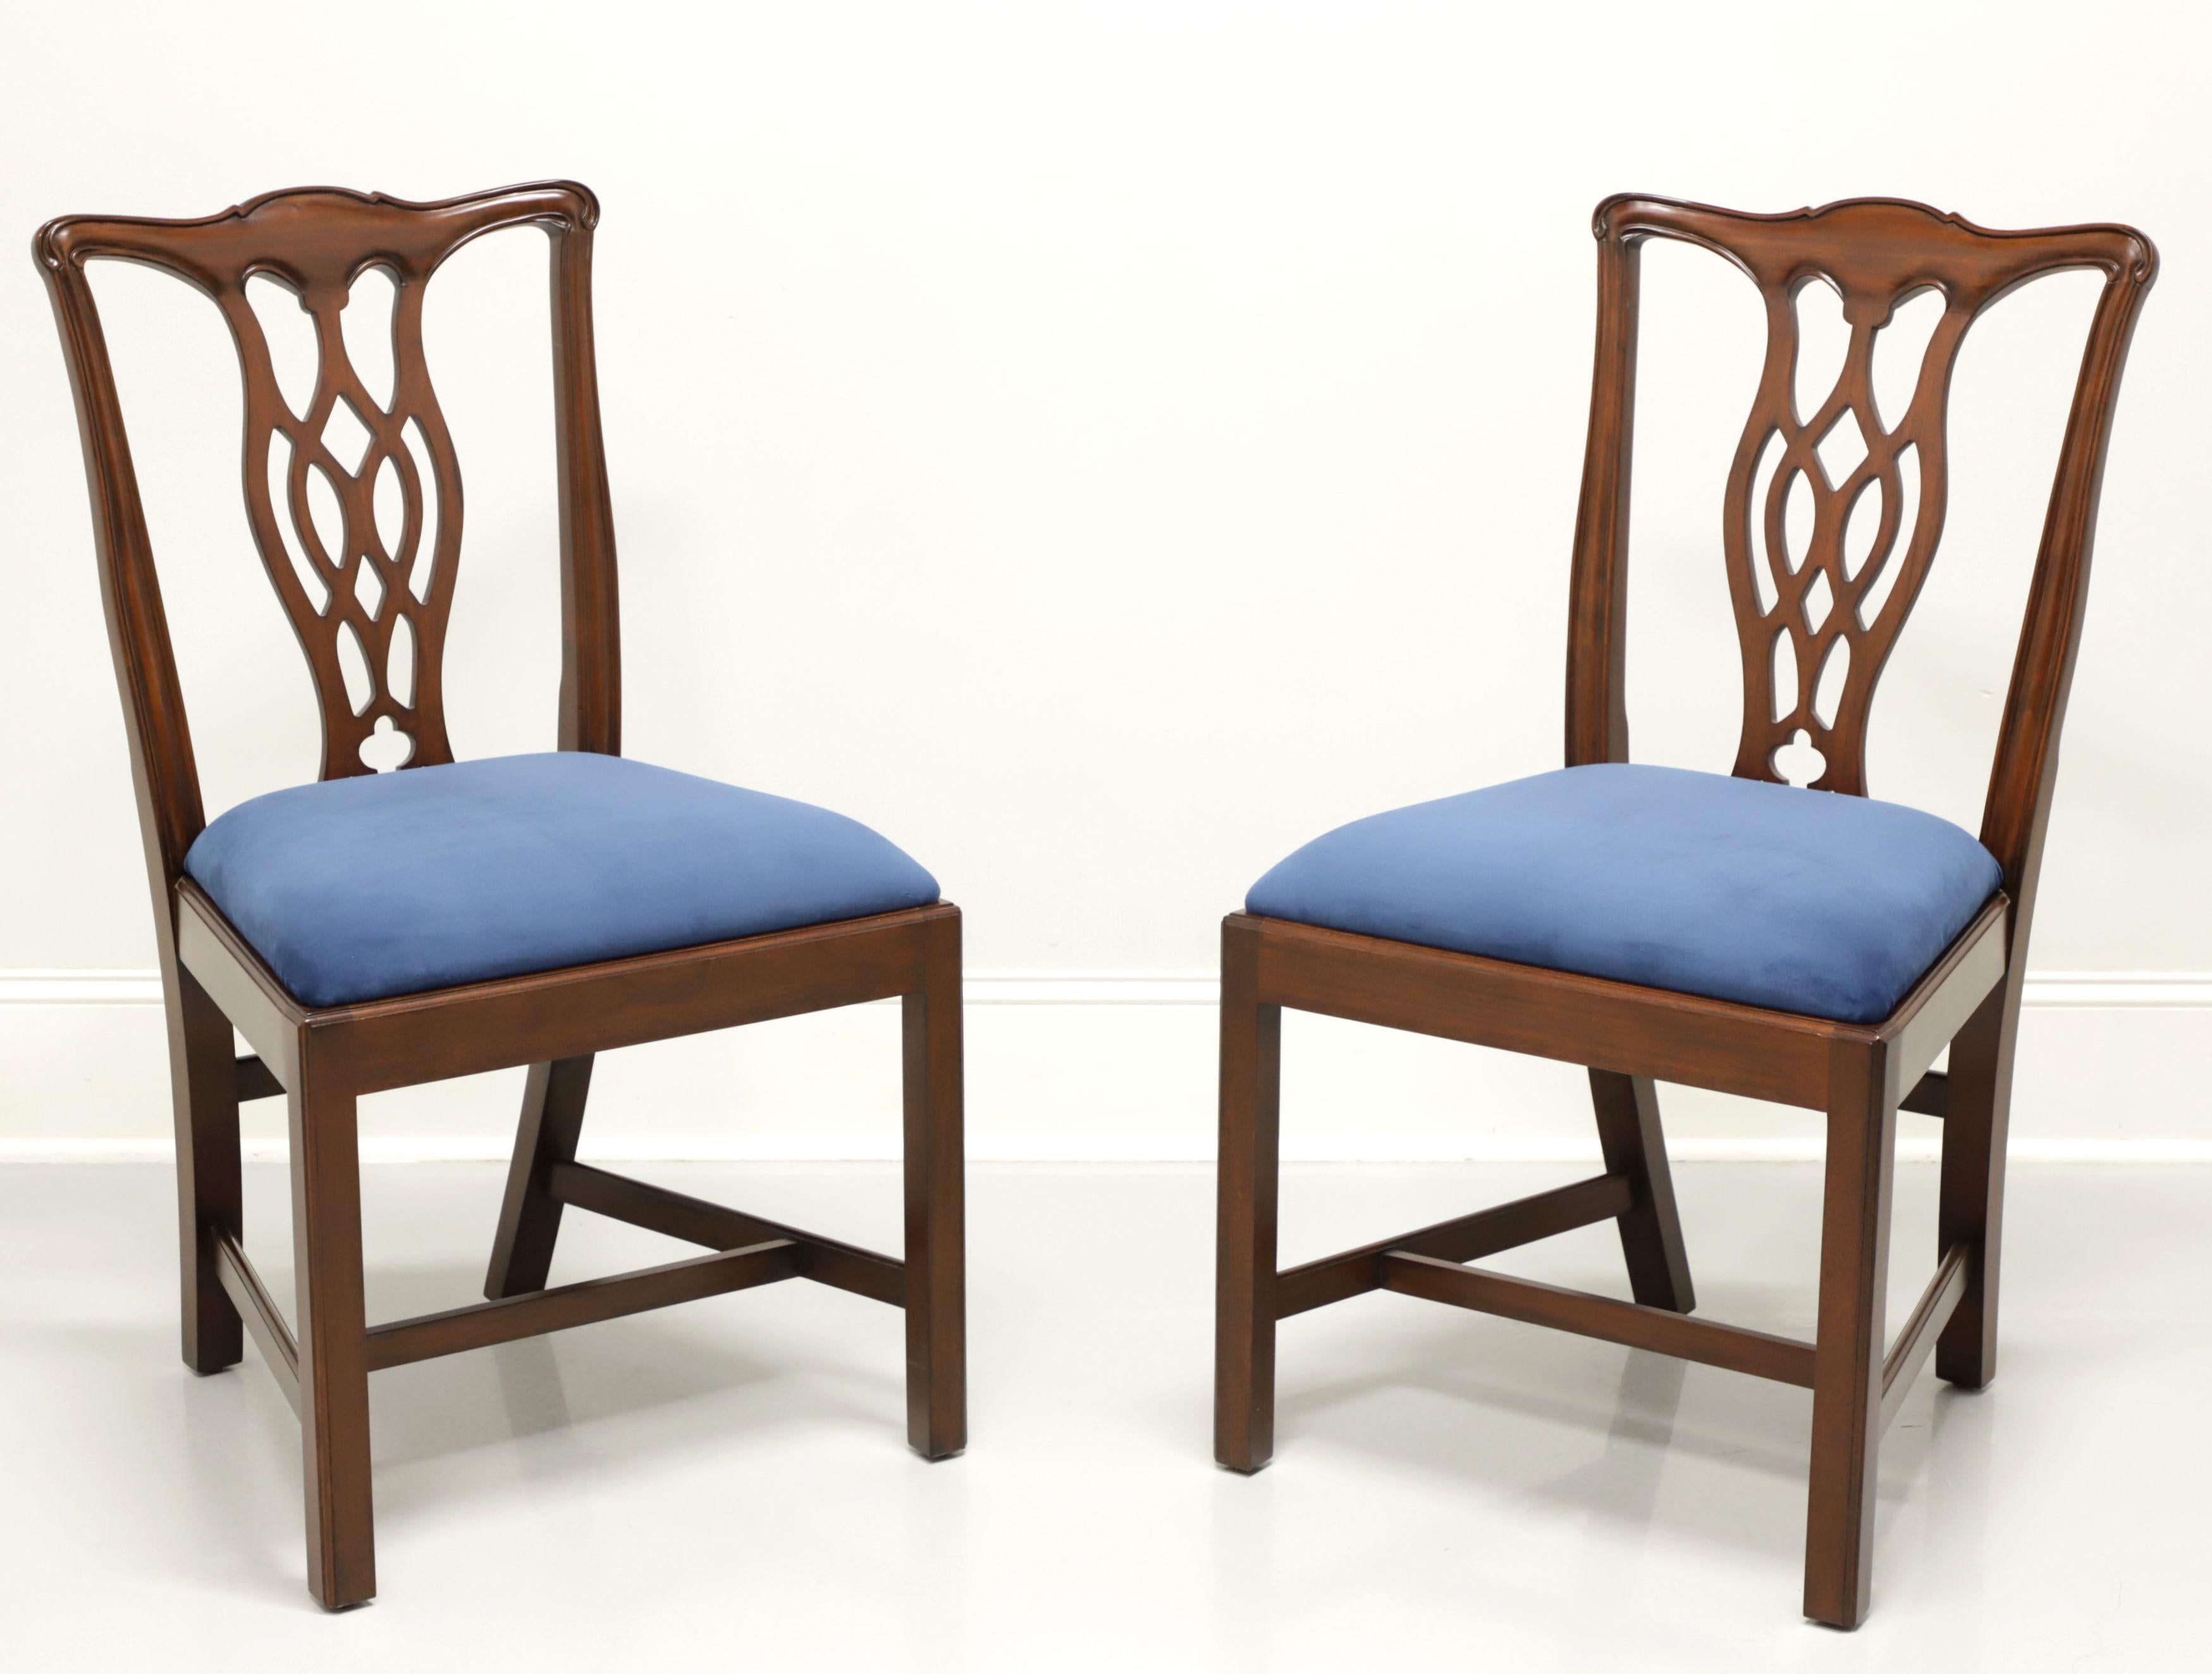 HICKORY CHAIR Mahogany Chippendale Straight Leg Dining Side Chairs - Pair 3